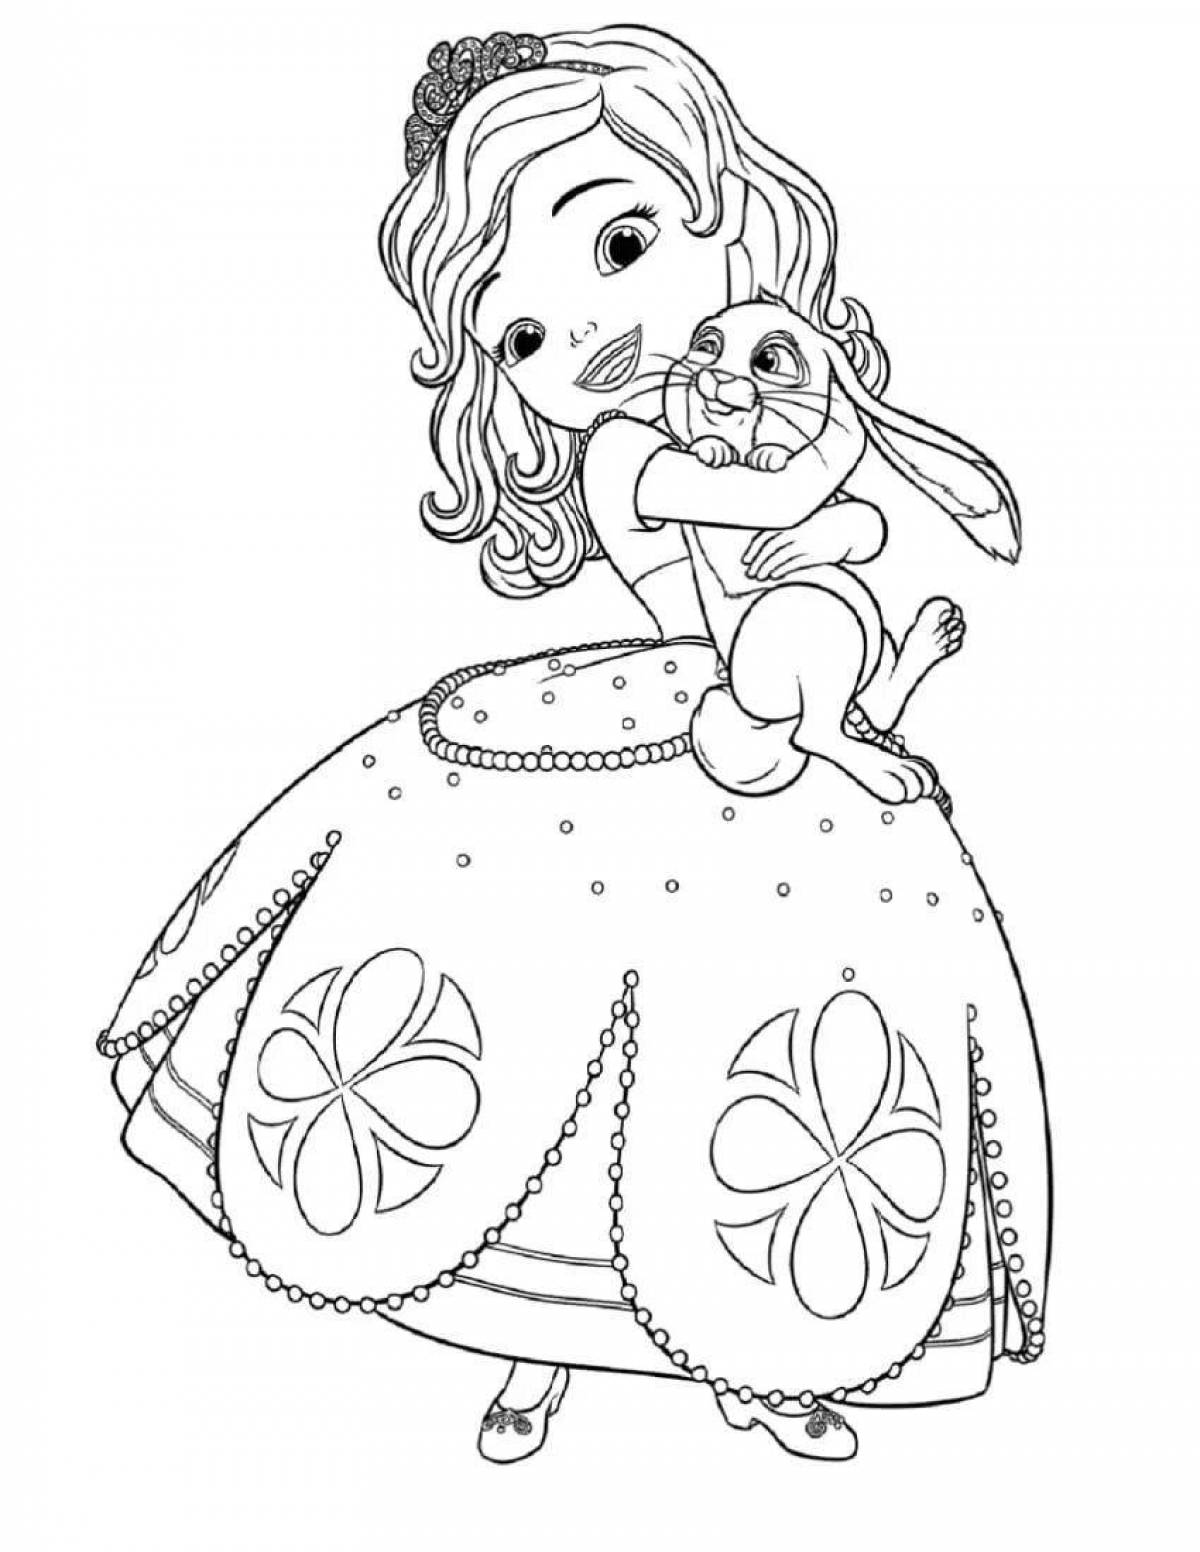 Great princess coloring pages for girls 4-5 years old